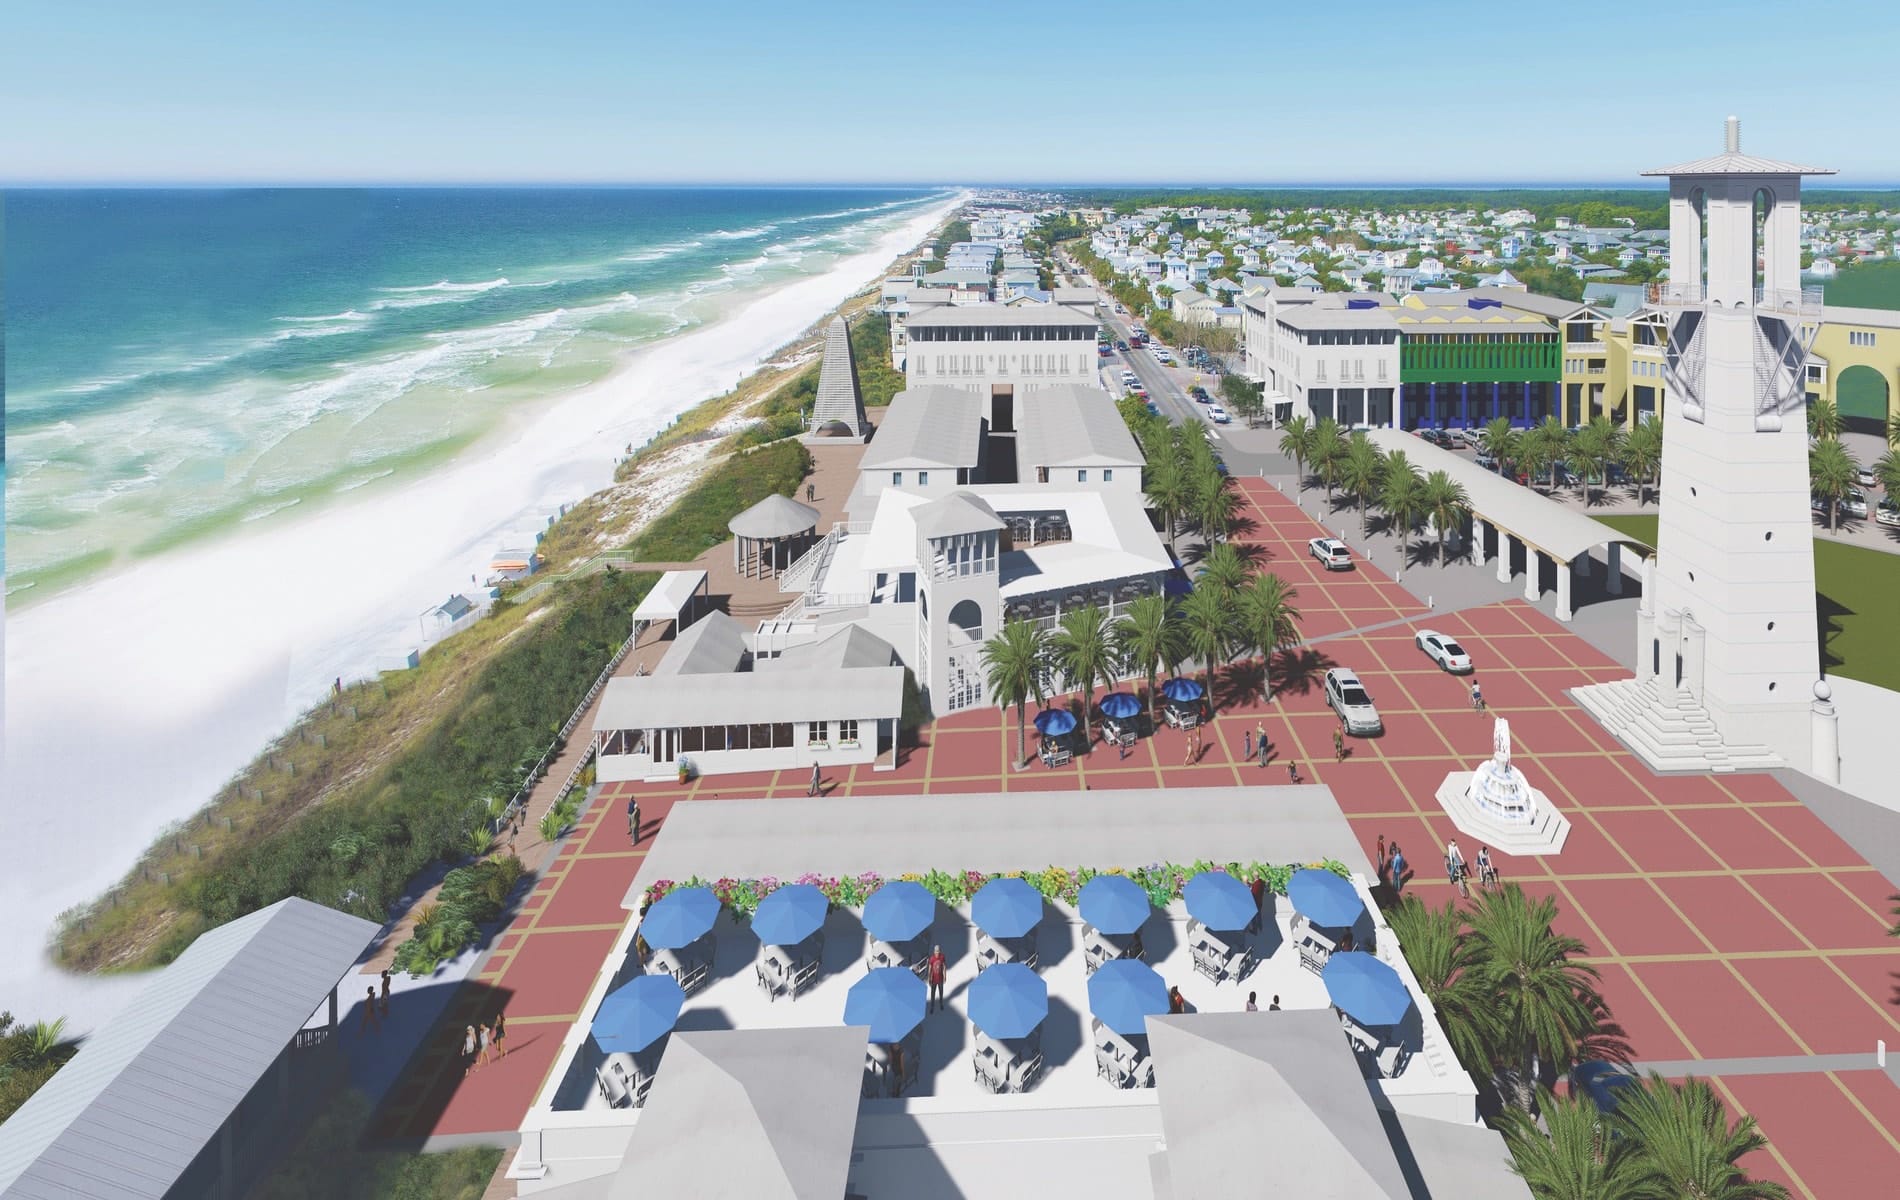 Rendering by Dhiru A. Thadani of Seaside’s proposed new plaza, including planned additions to Bud & Alley’s restaurants, the Krier Tower, and more